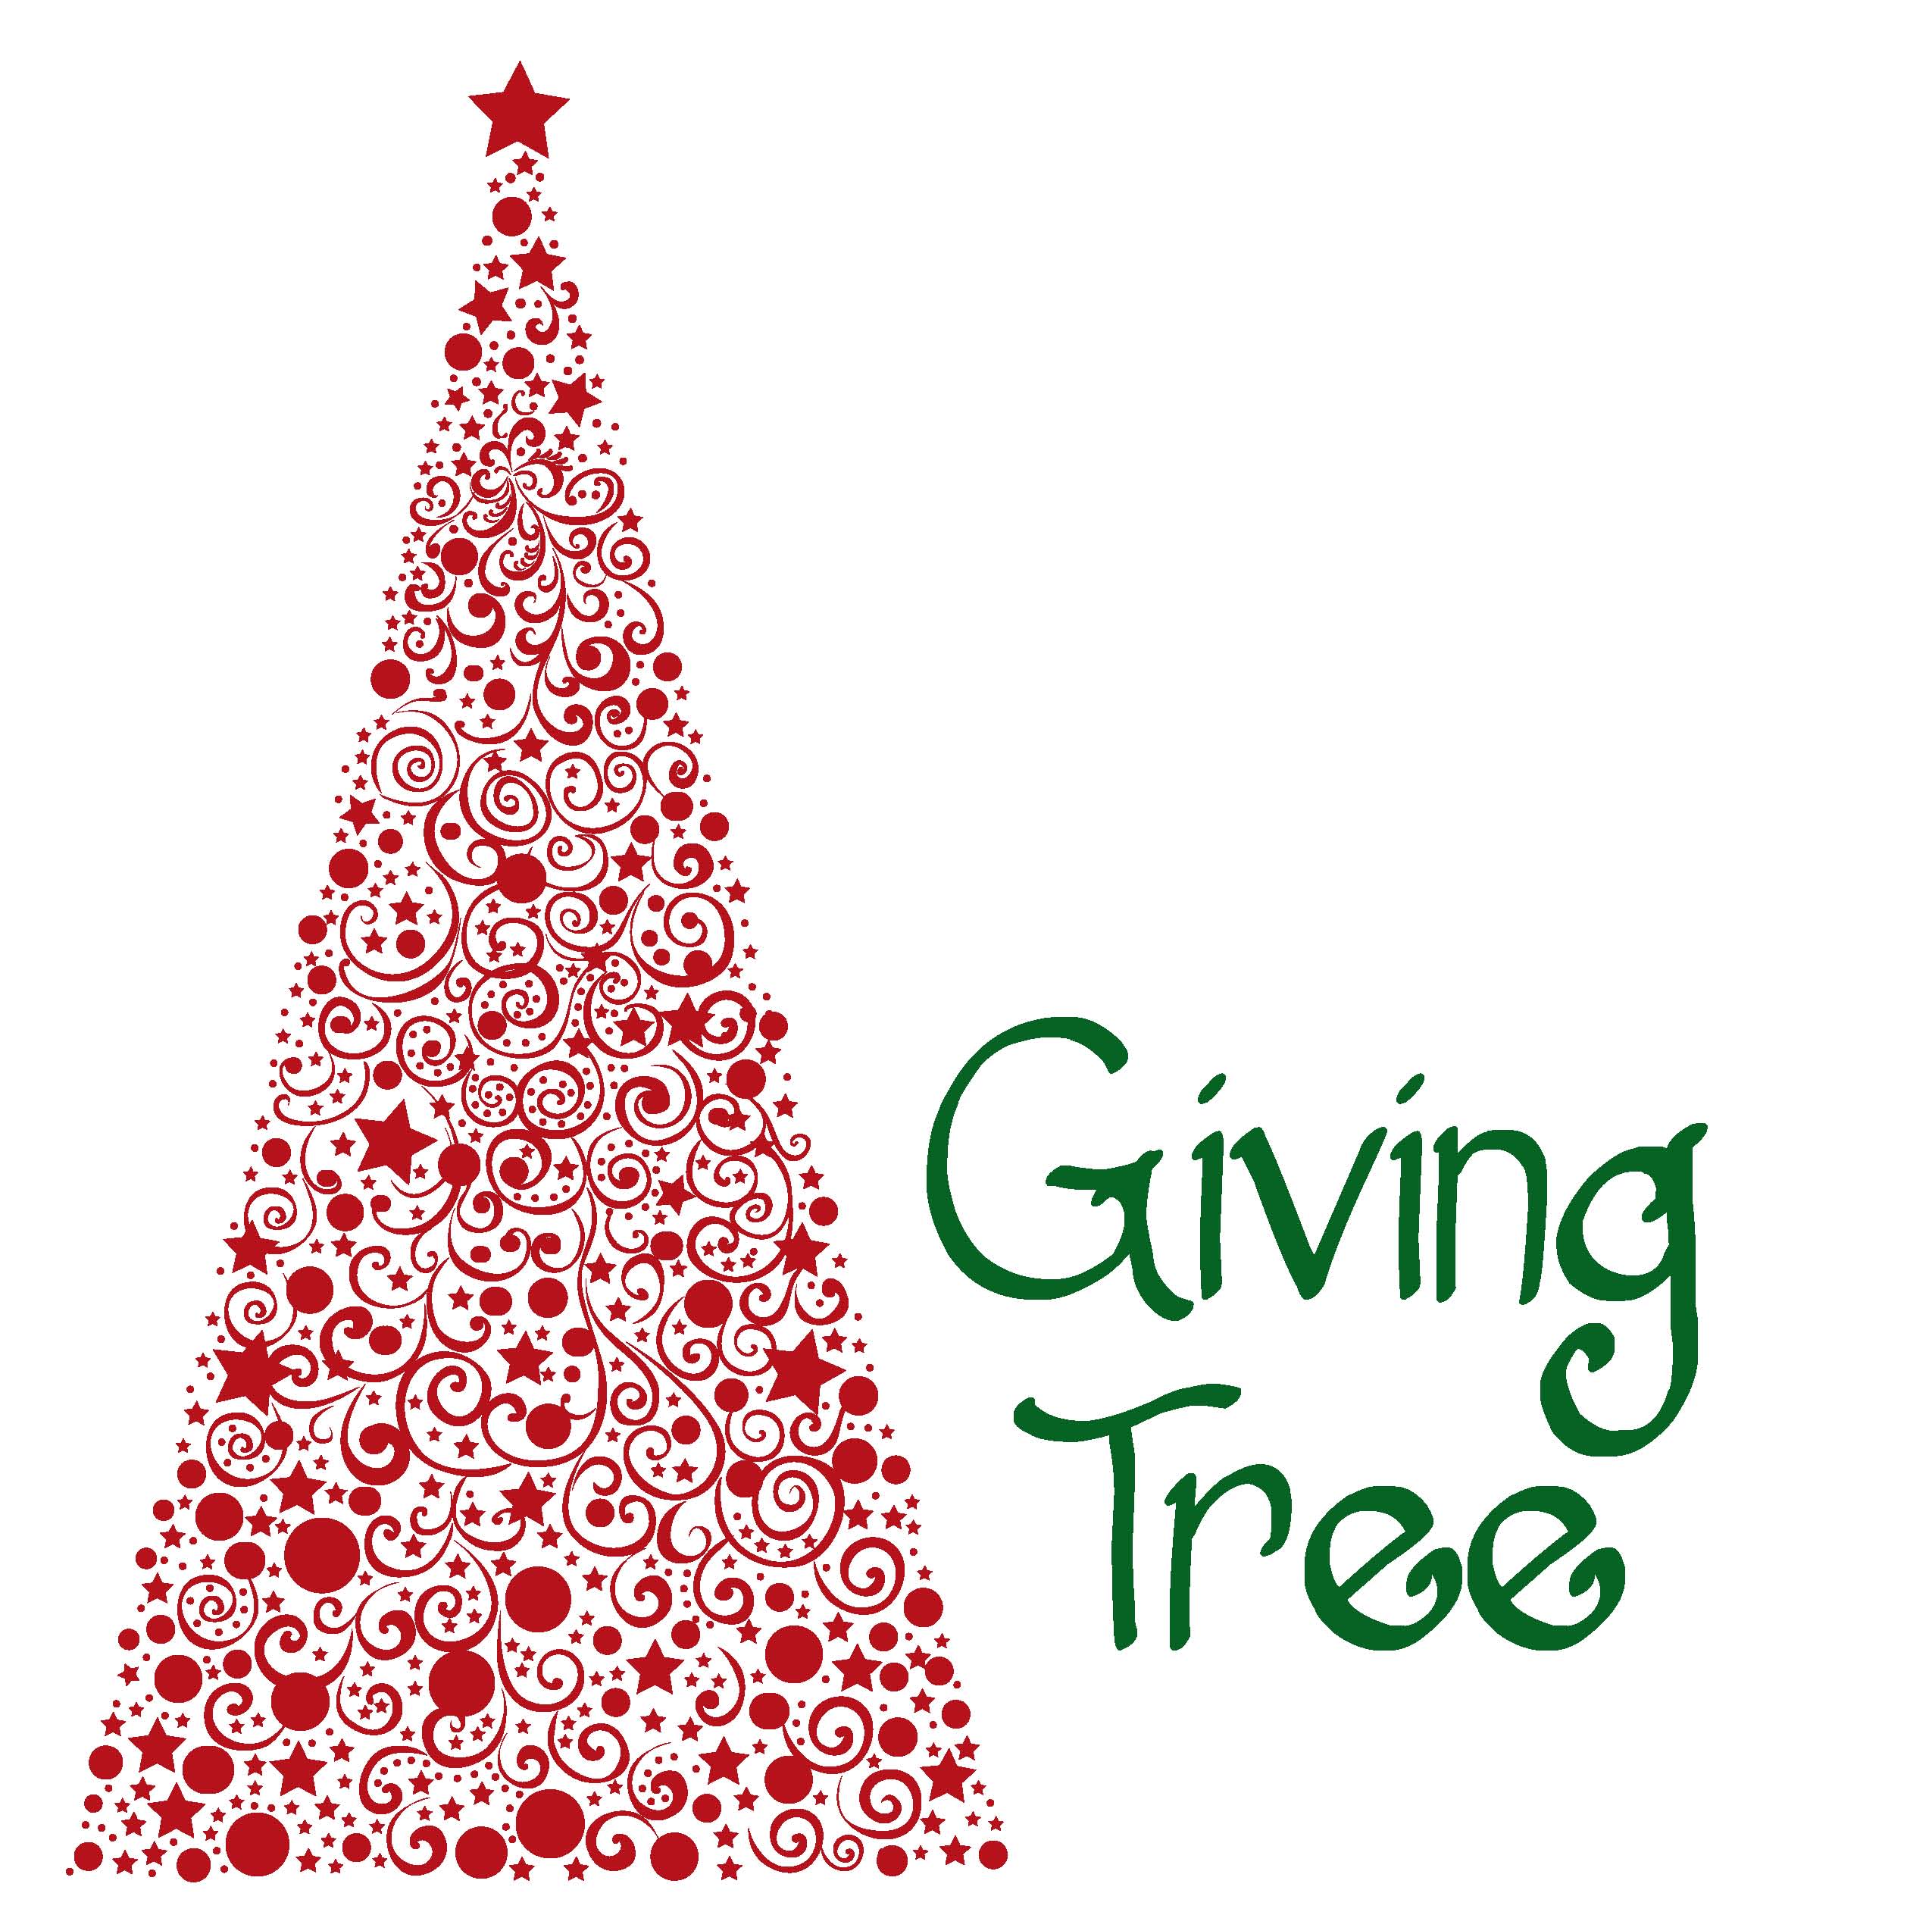 the-giving-tree-quotes-quotesgram